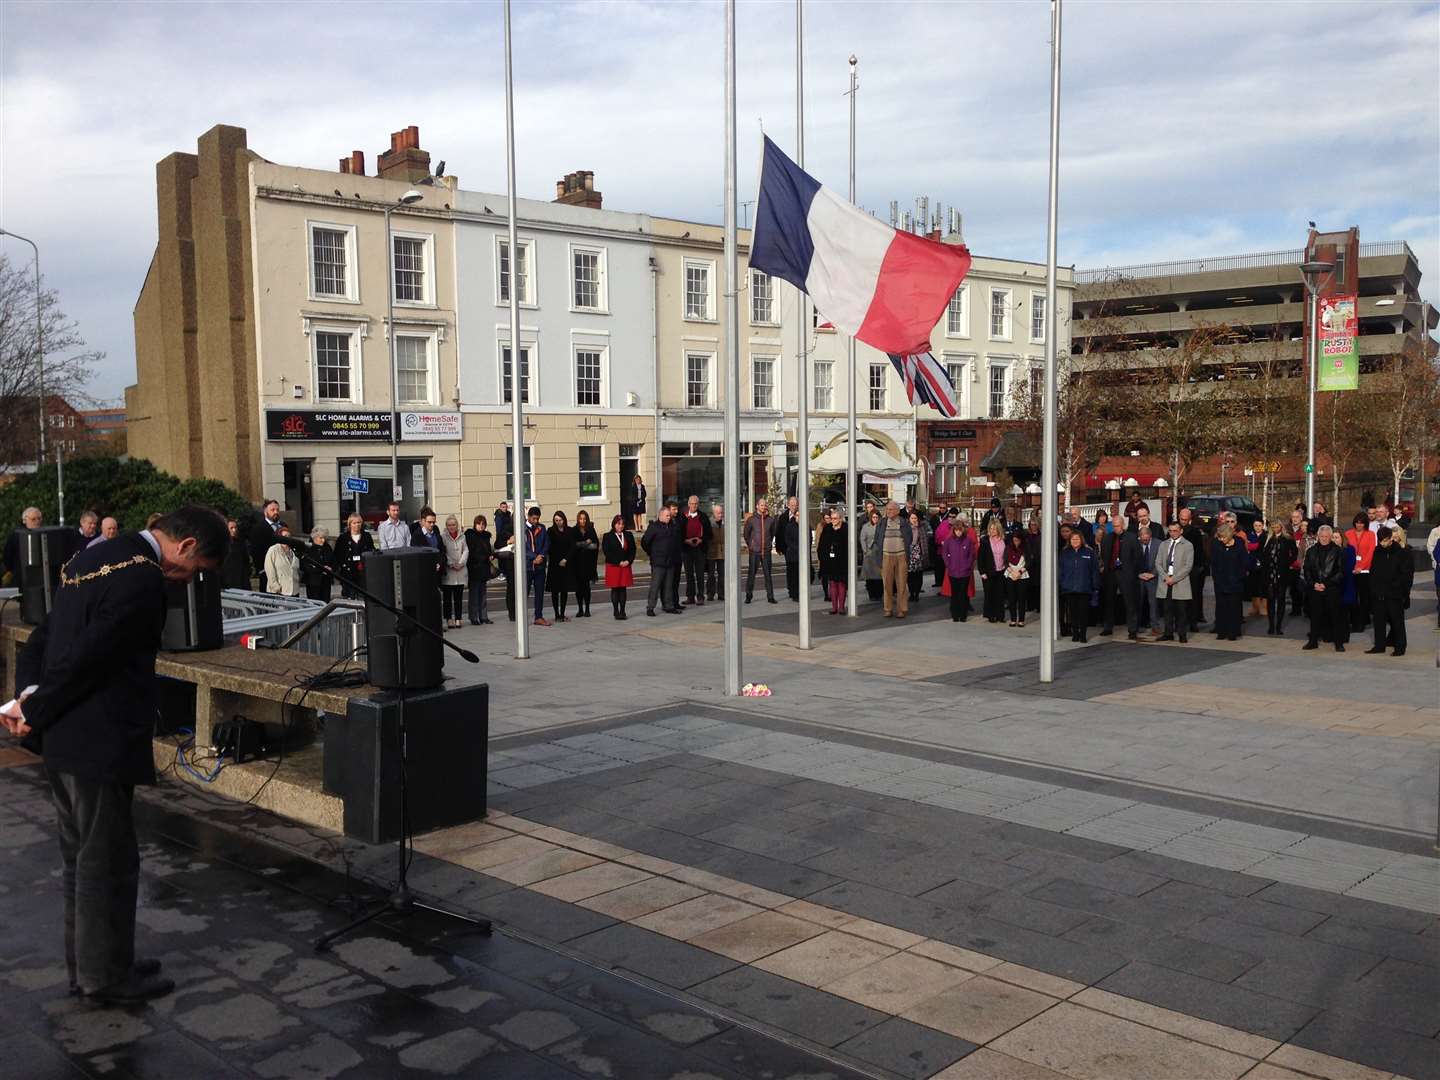 Gravesham mayor Cllr Mick Wenban bows his head during the minute's silence at Gravesend's service to those murdered during the Paris terror attacks